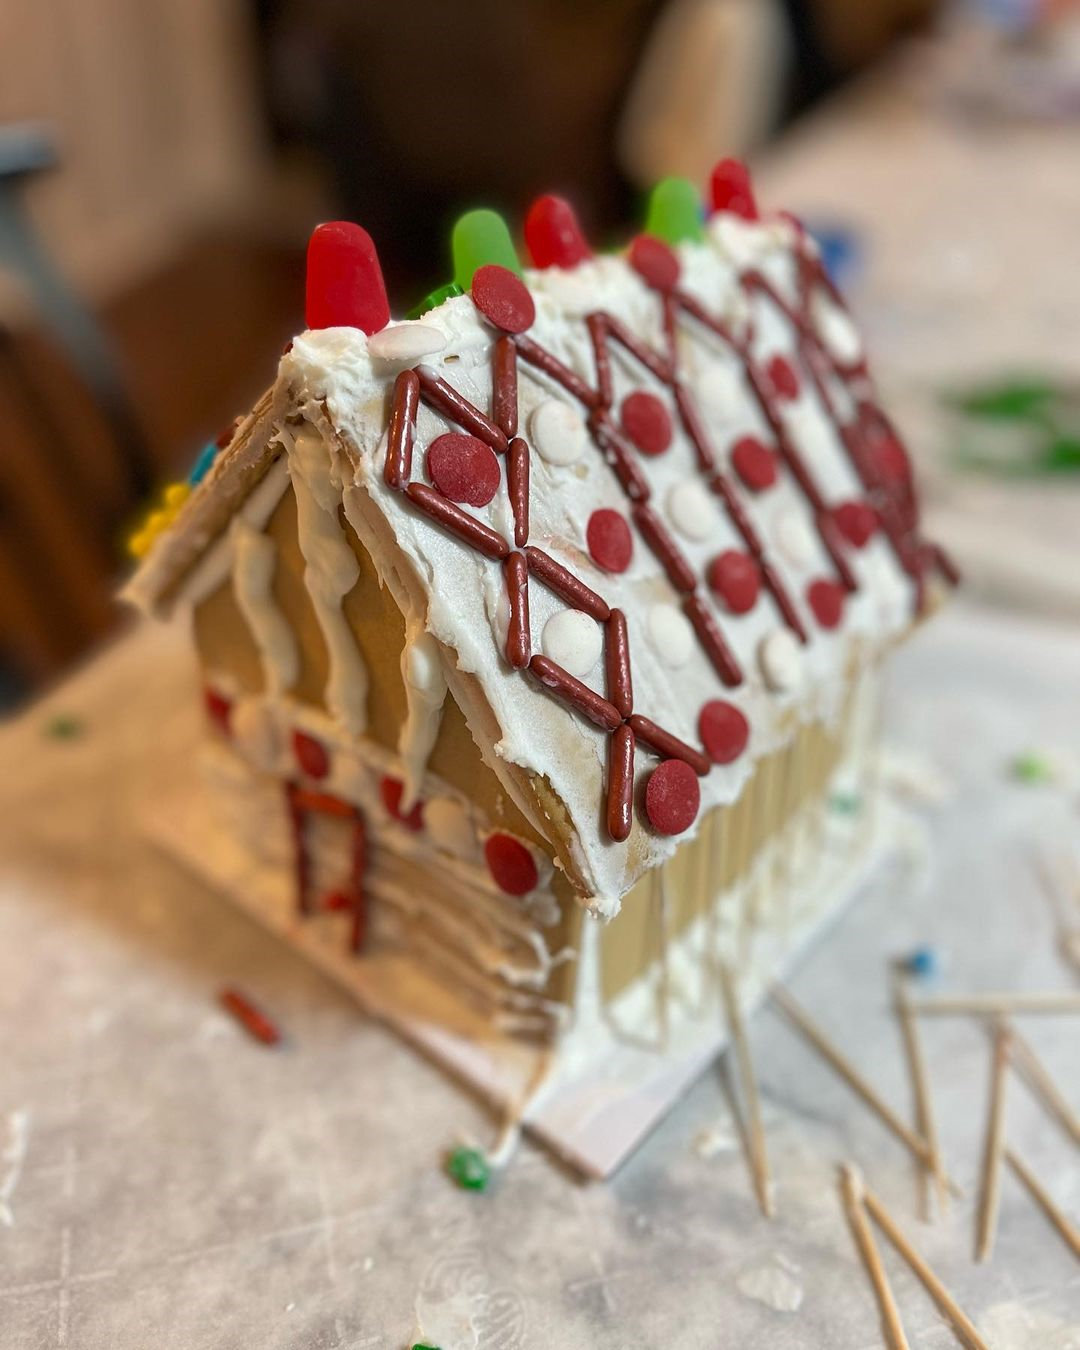 30 Cute and Easy Gingerbread House Ideas